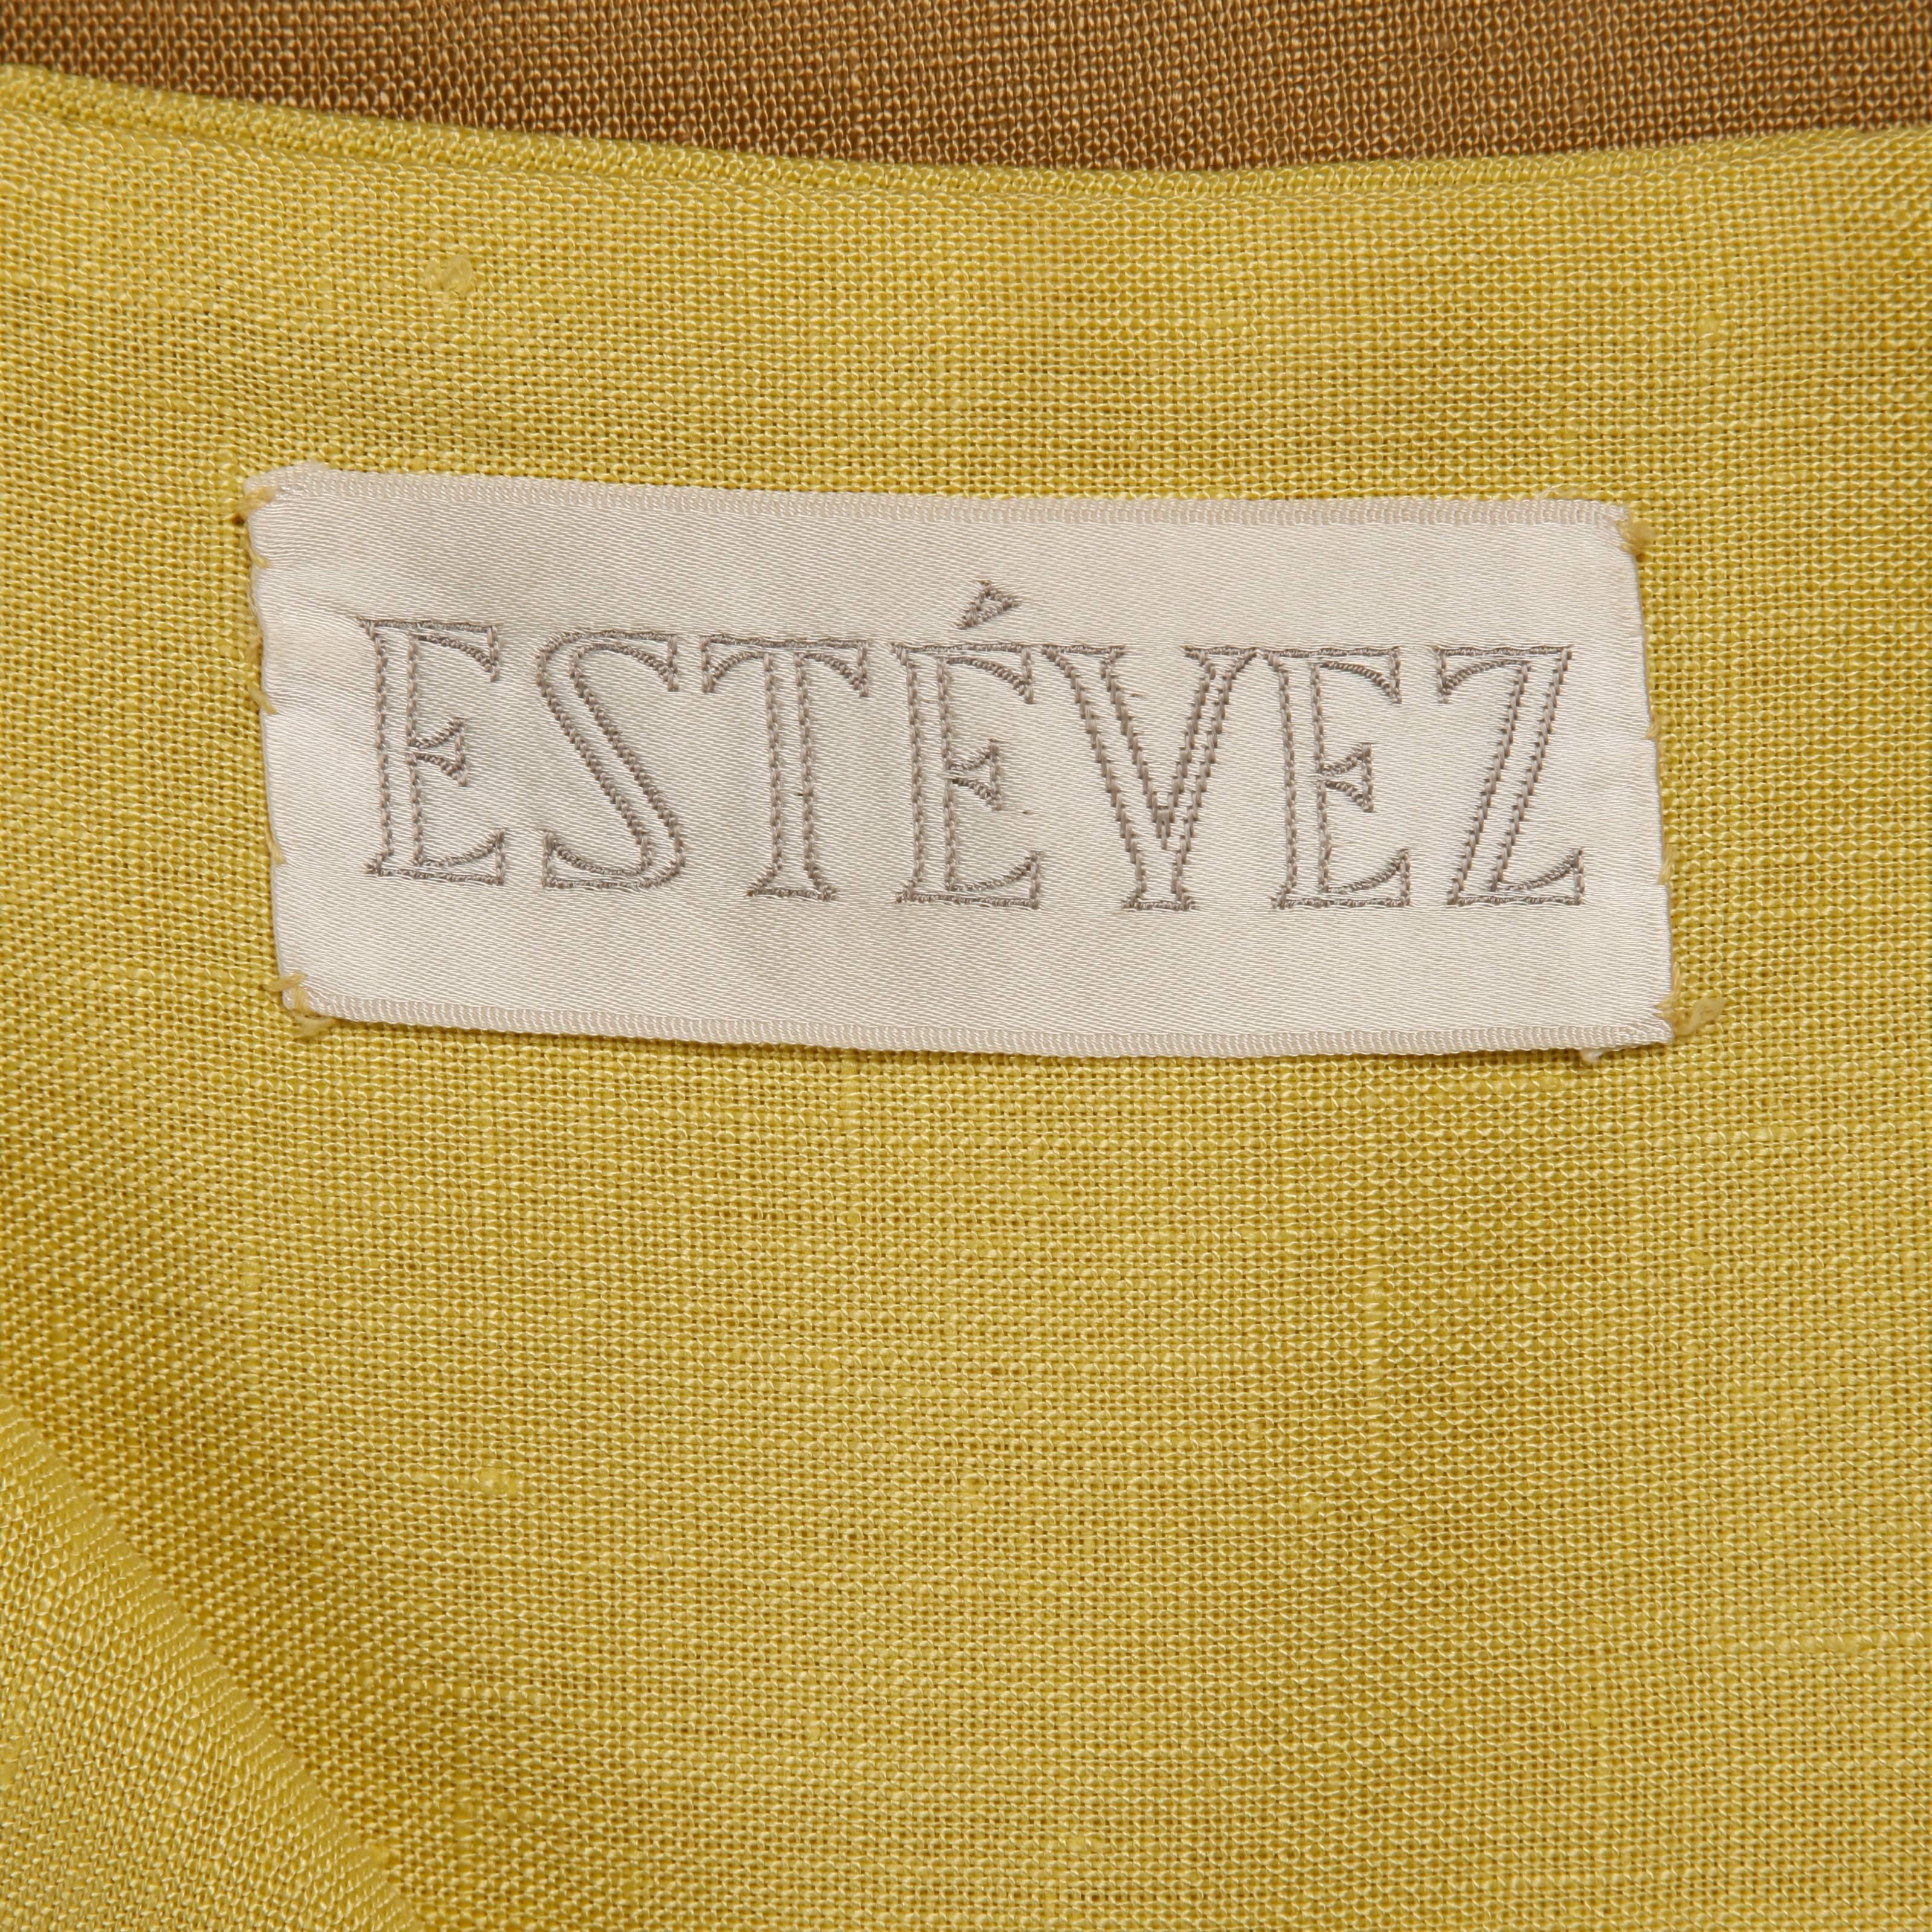 Elegant 1960s vintage yellow color block linen sheath dress by Estevez. Fully lined with back hook, covered snap and metal zip closure and shoulder hook closure. The marked size is 8, but the dress fits like an XS due to the tiny waist measurement.